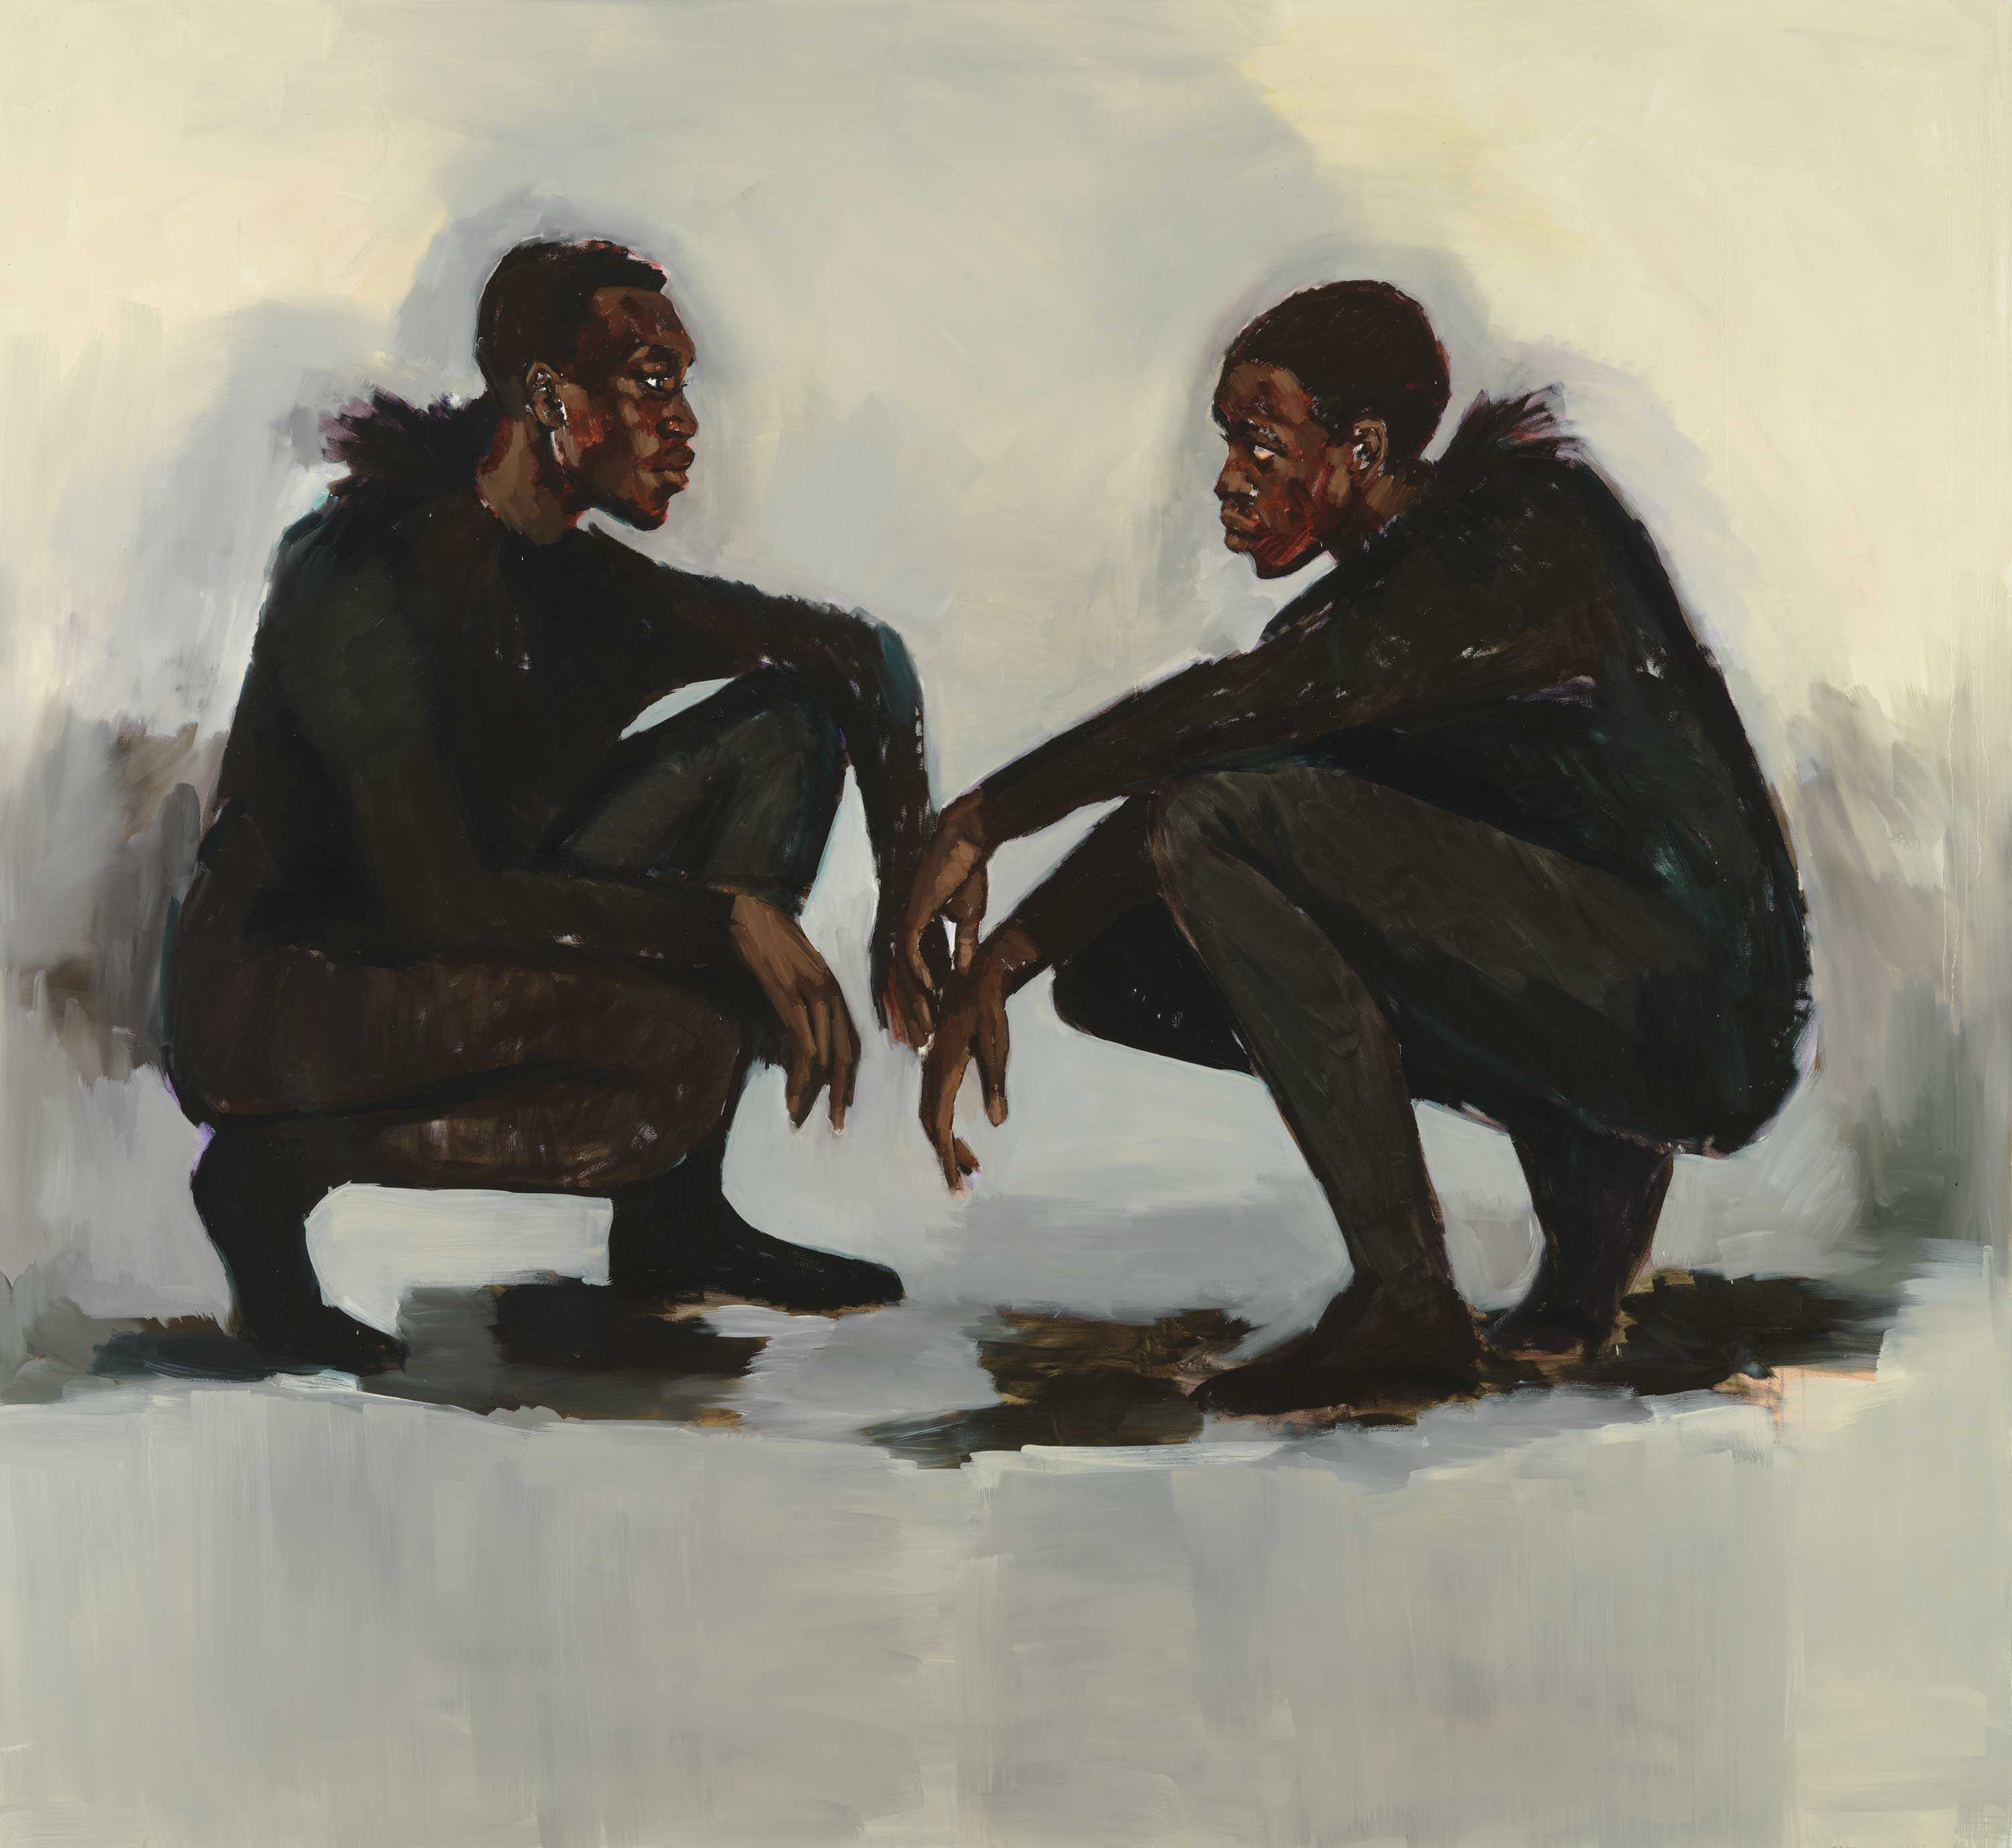 Lynette Yiadom-Boakye, No Need of Speech 2018 Carnegie Museum of Art, Pittsburgh © Courtesy of the artist and Jack Shainman Gallery, New York. Photo: Bryan Conley